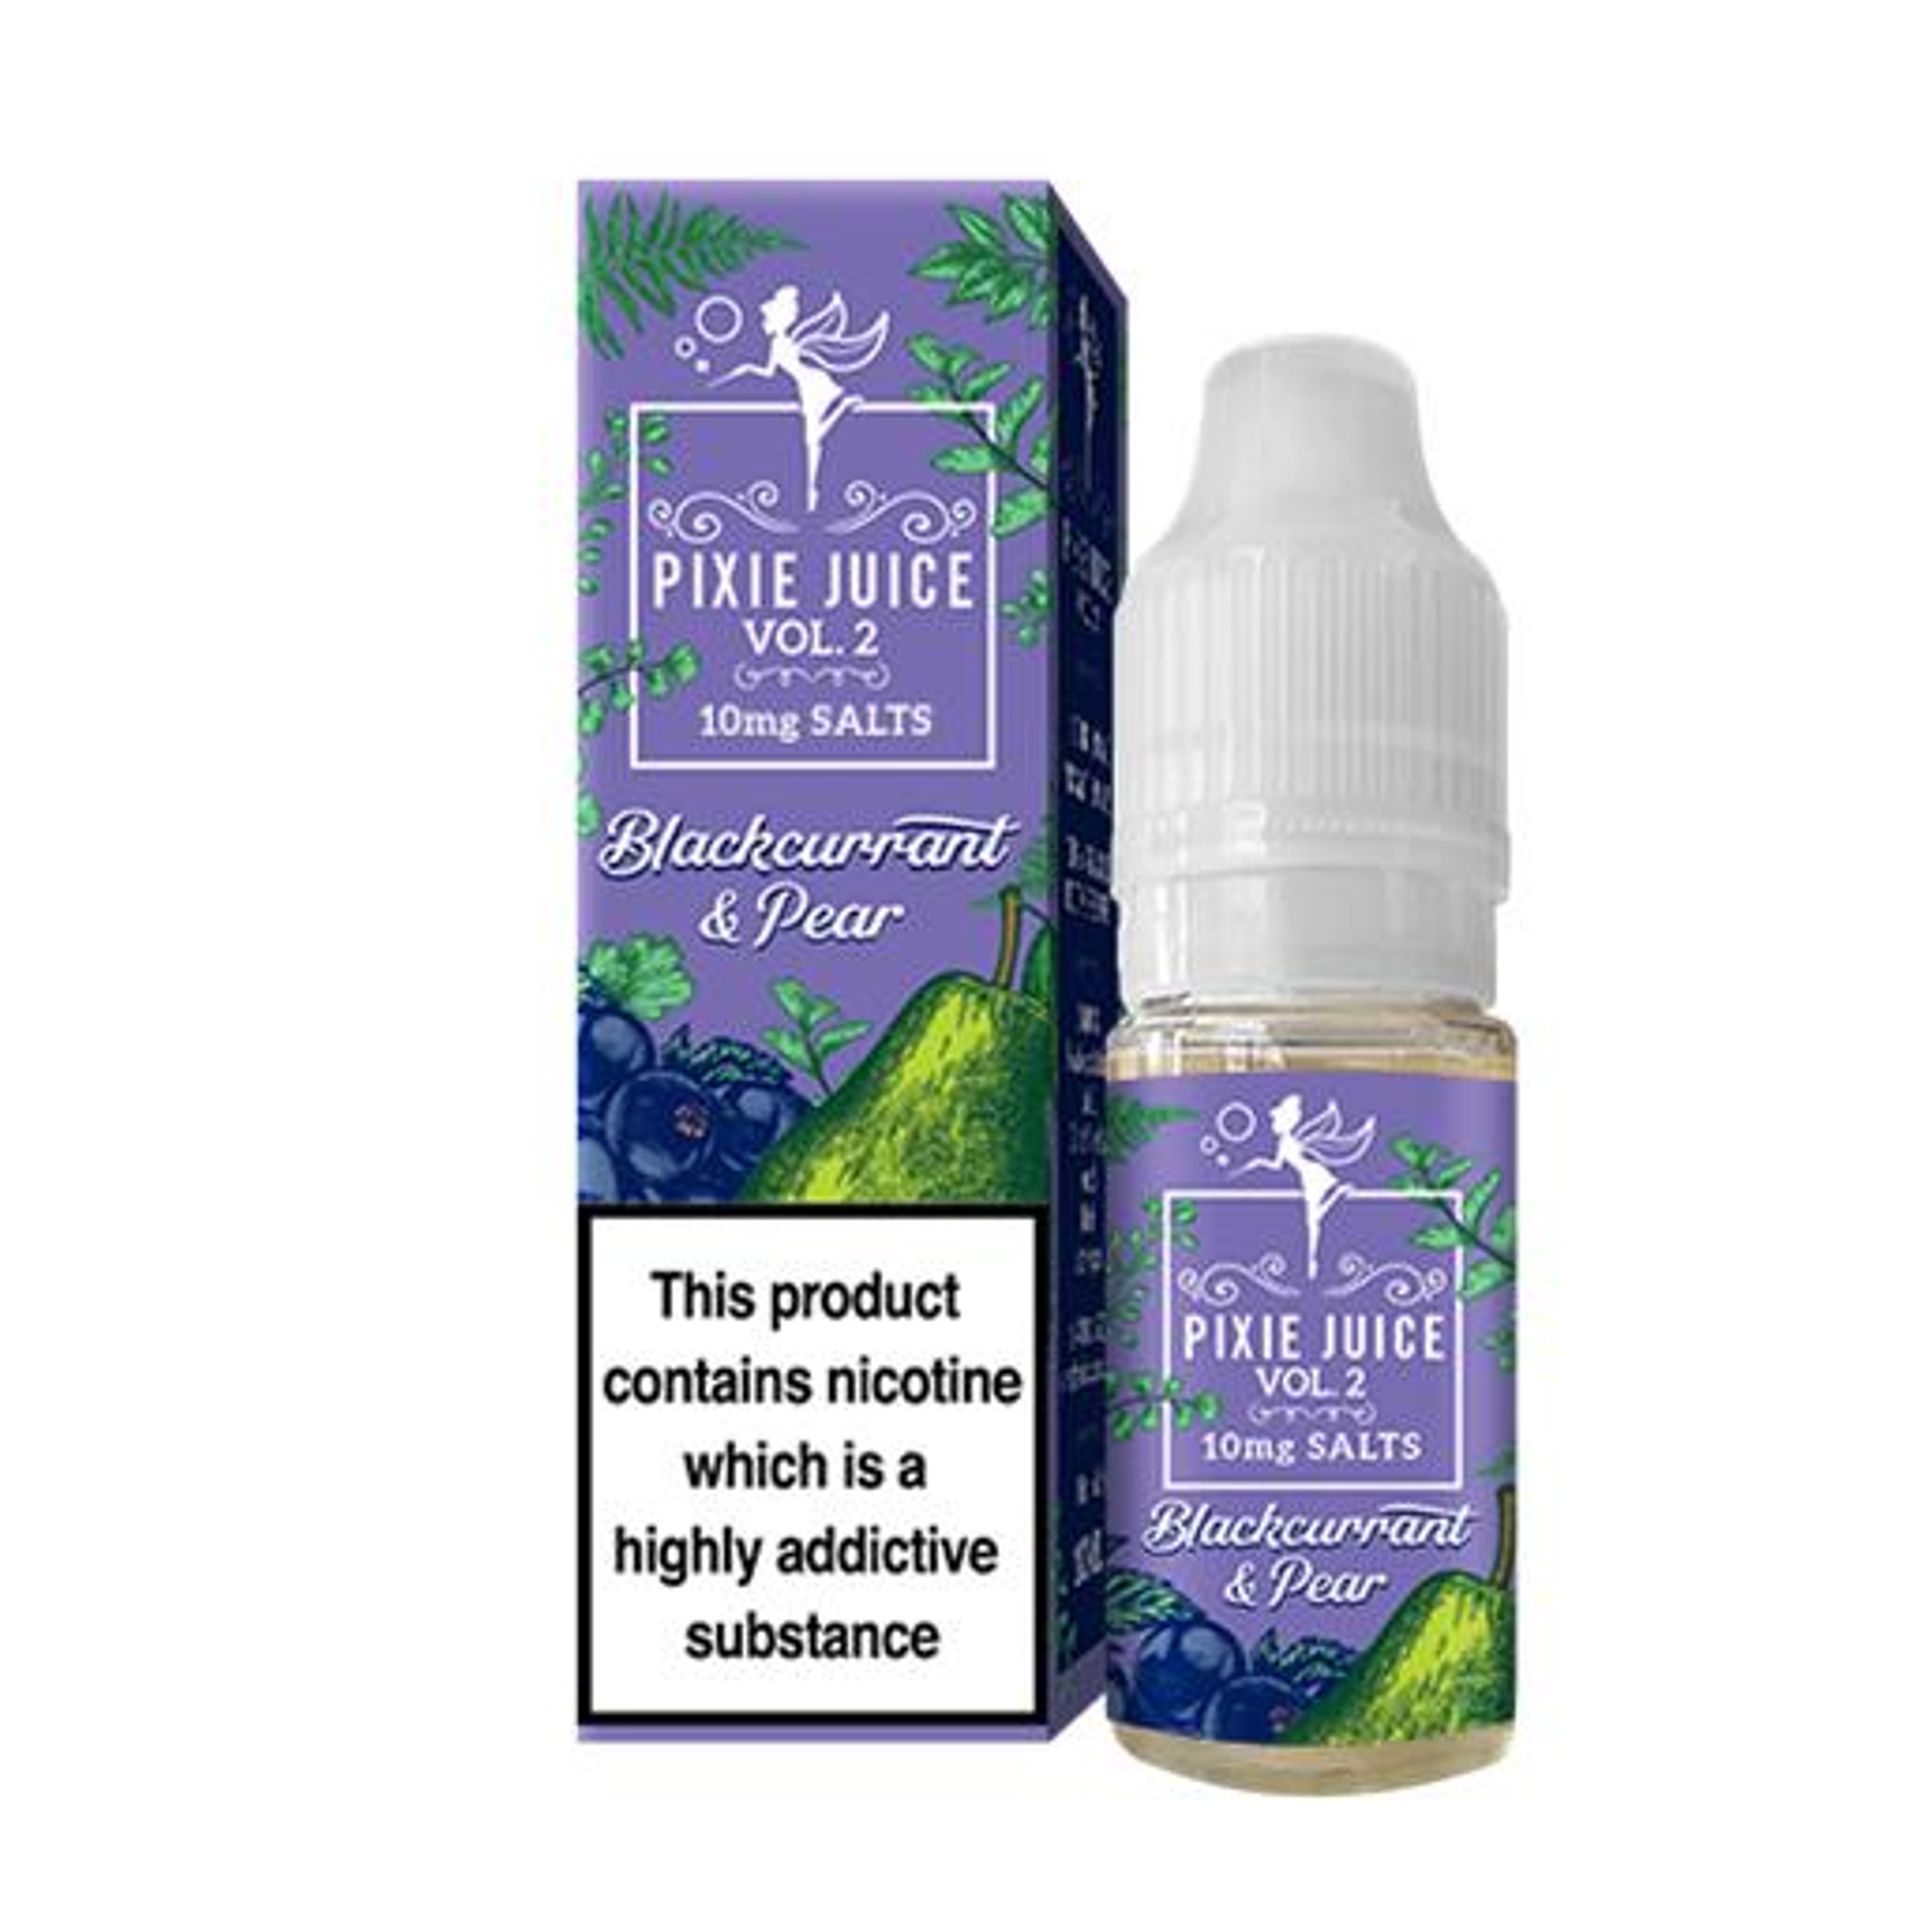 Image of Blackcurrant & Pear by Pixie Juice Vol2